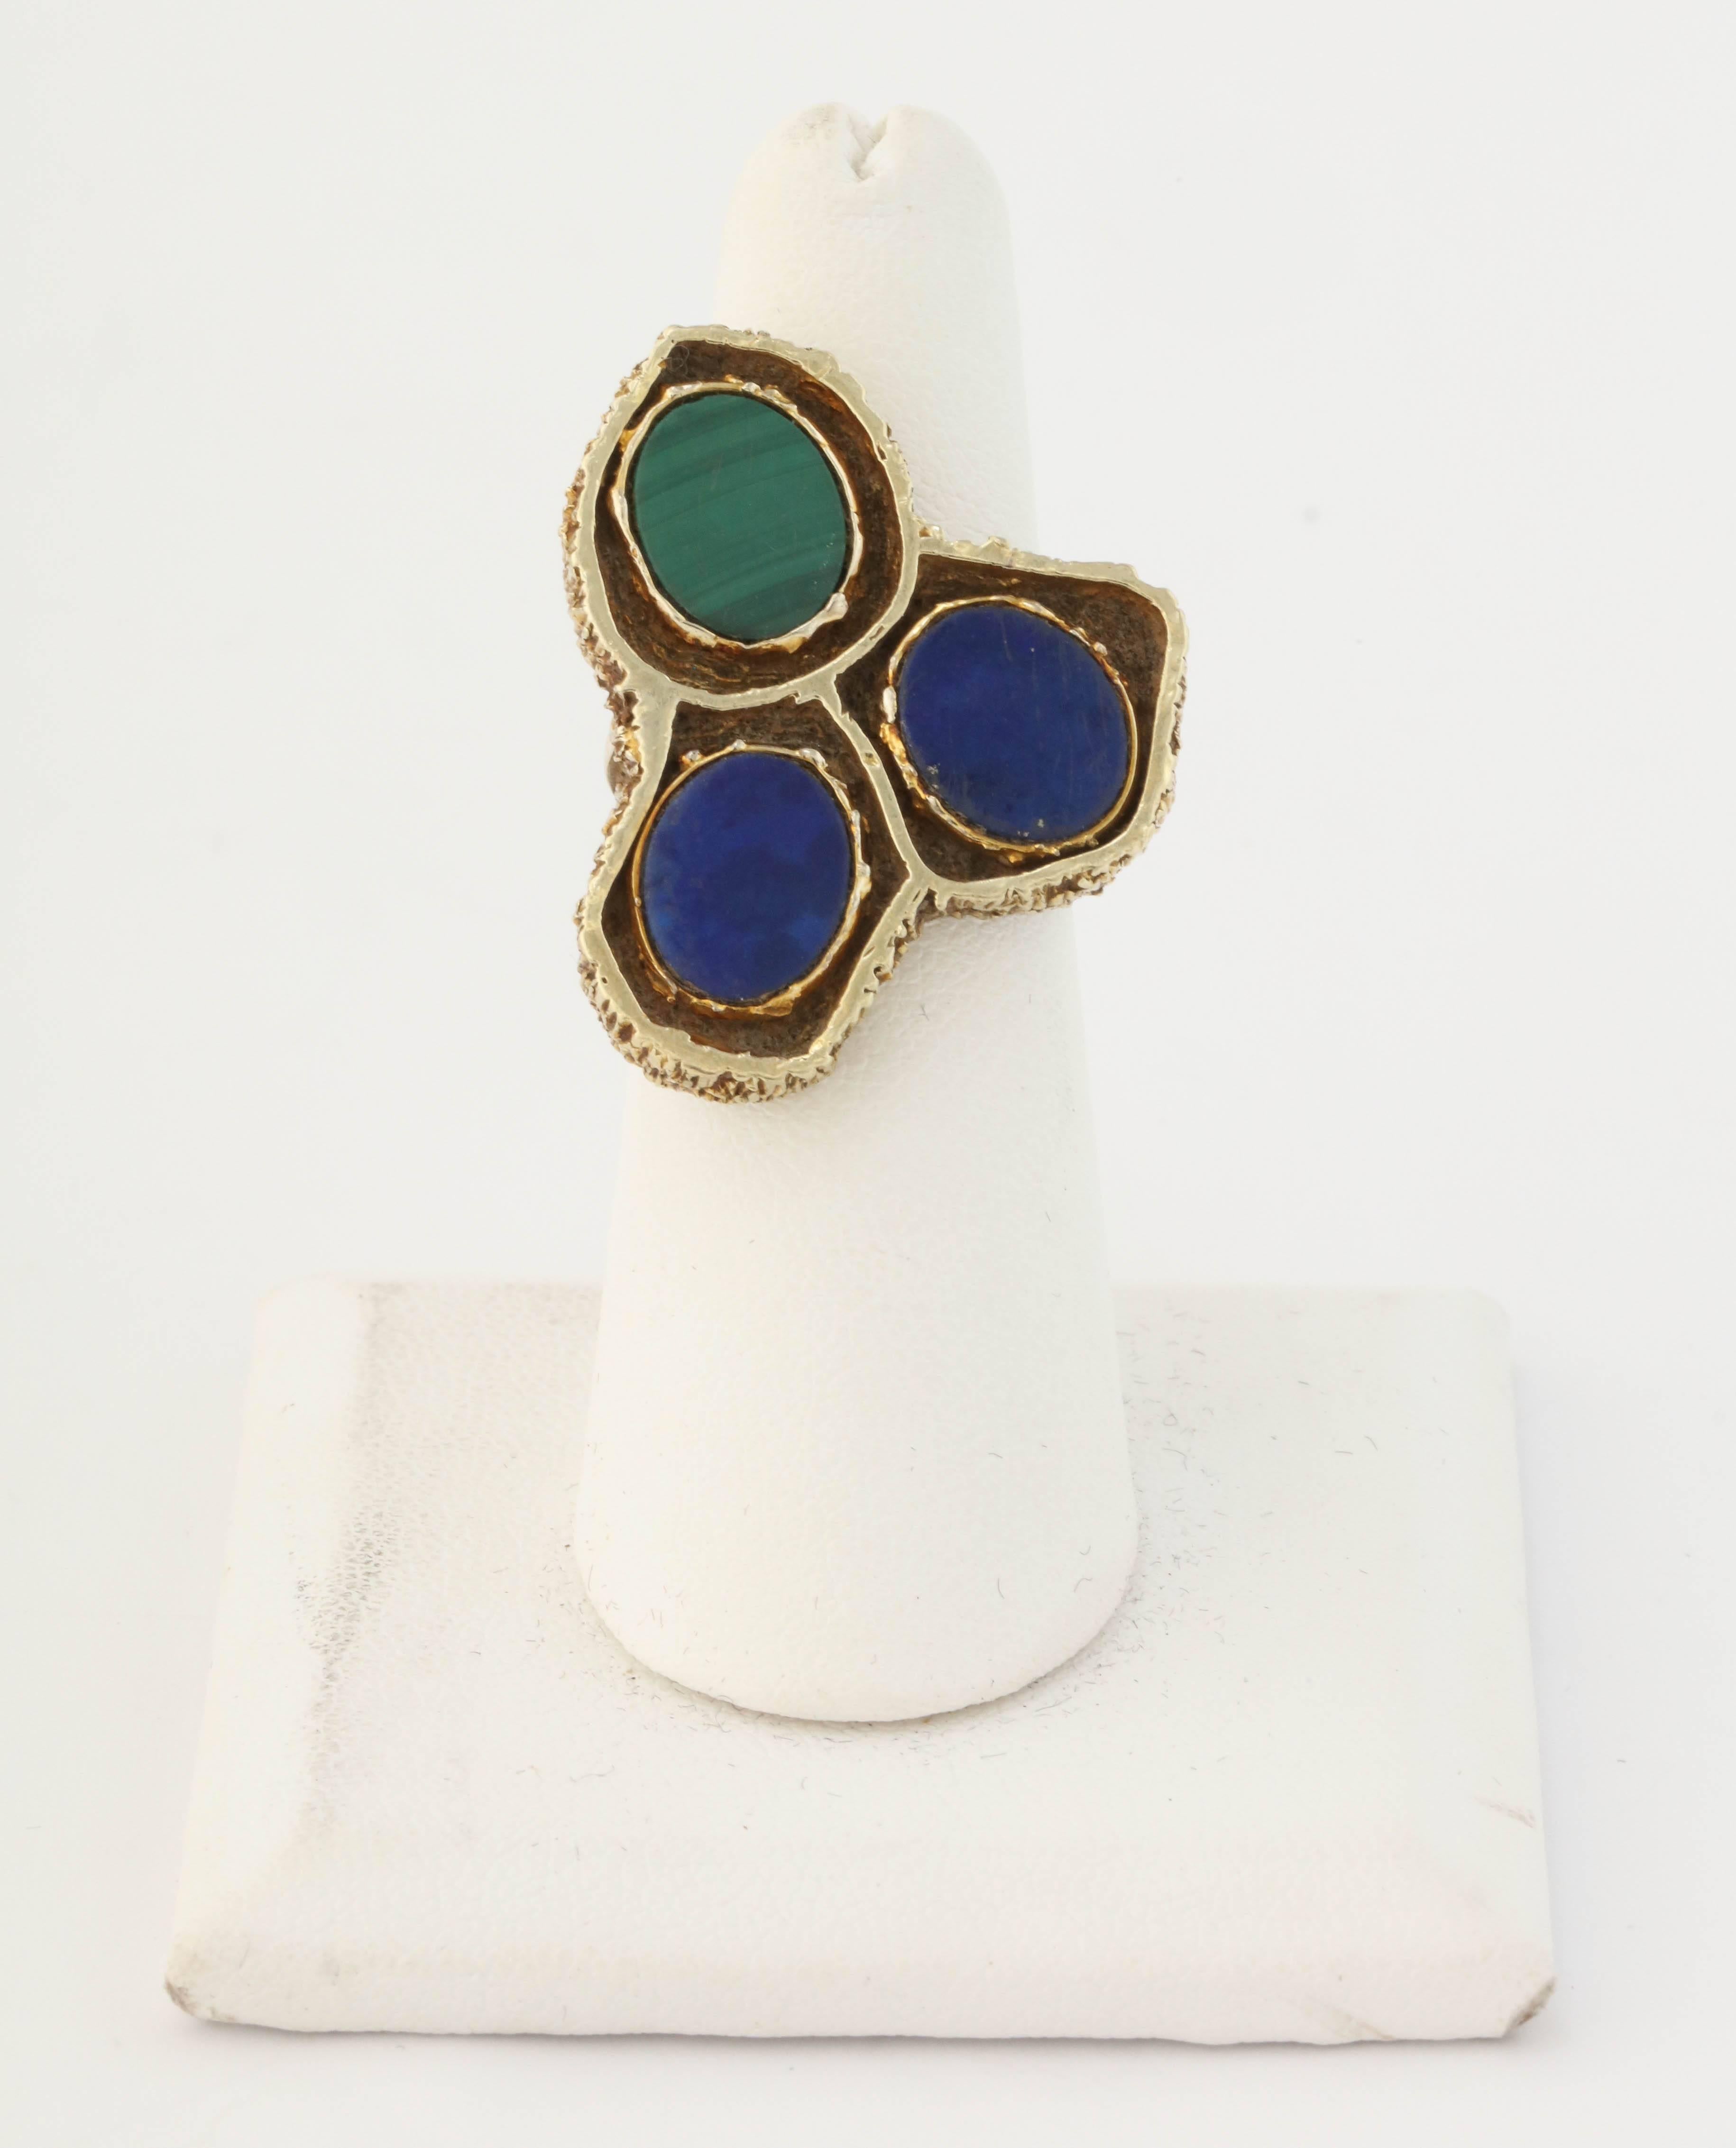 14kt yellow gold [3] piece ensemble consisting of alternating {2} Different Types Of Textured Gold Frames Centering High Quality Lapis Lazuli Stones And Alternating High Quality Malachite Stones Throughout. {1] Bracelet. Made in the 1960's In